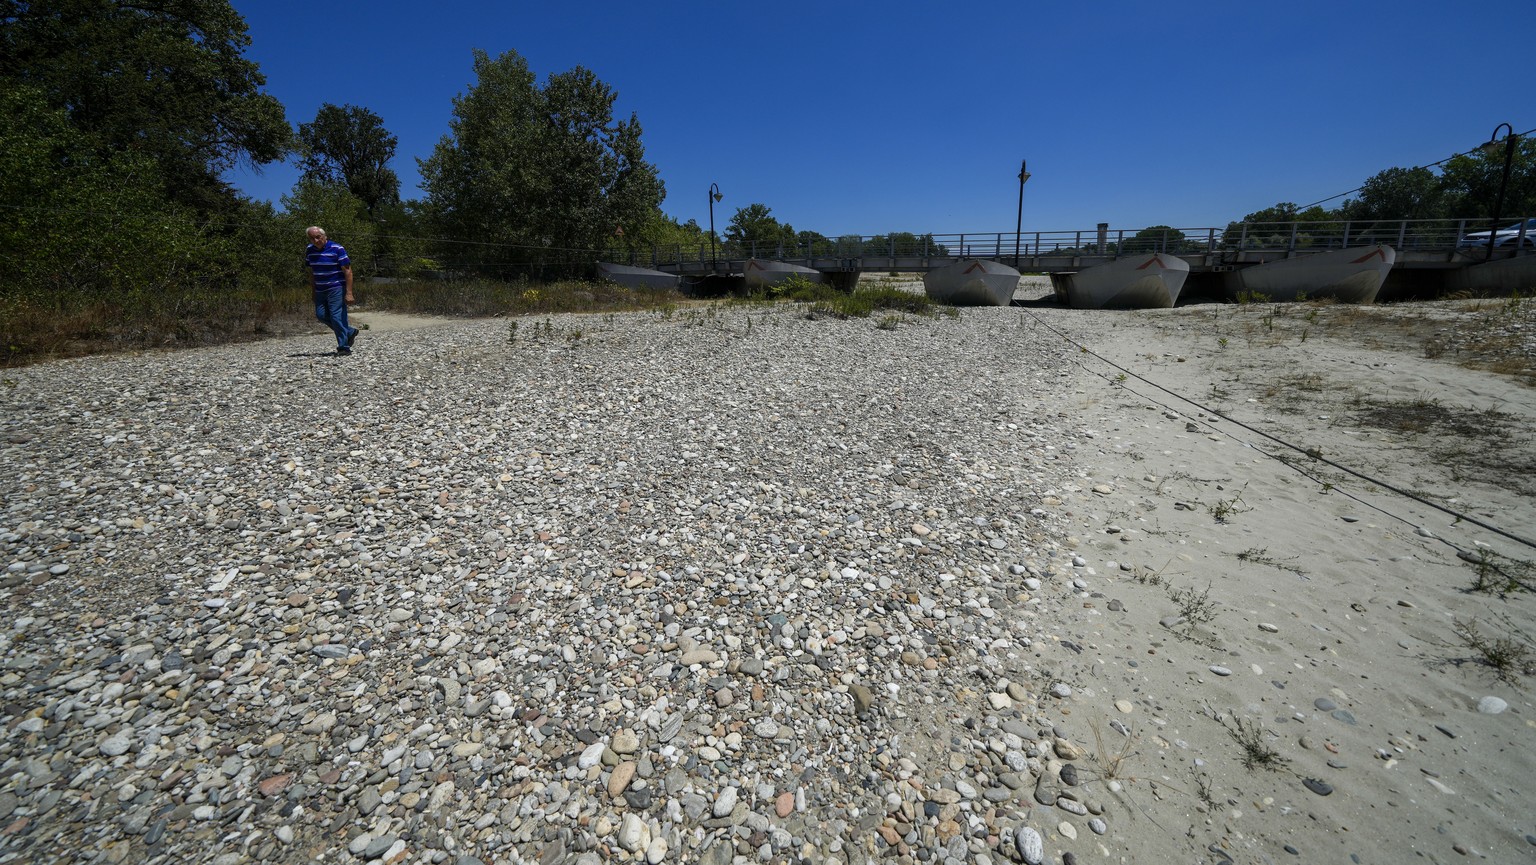 A man walks on the dry-out side of the riverbed of the Ticino river near Bereguardo, some 25 kilometers south of of Milan in northern Italy, Friday, July 8, 2022. The Italian government declared a sta ...